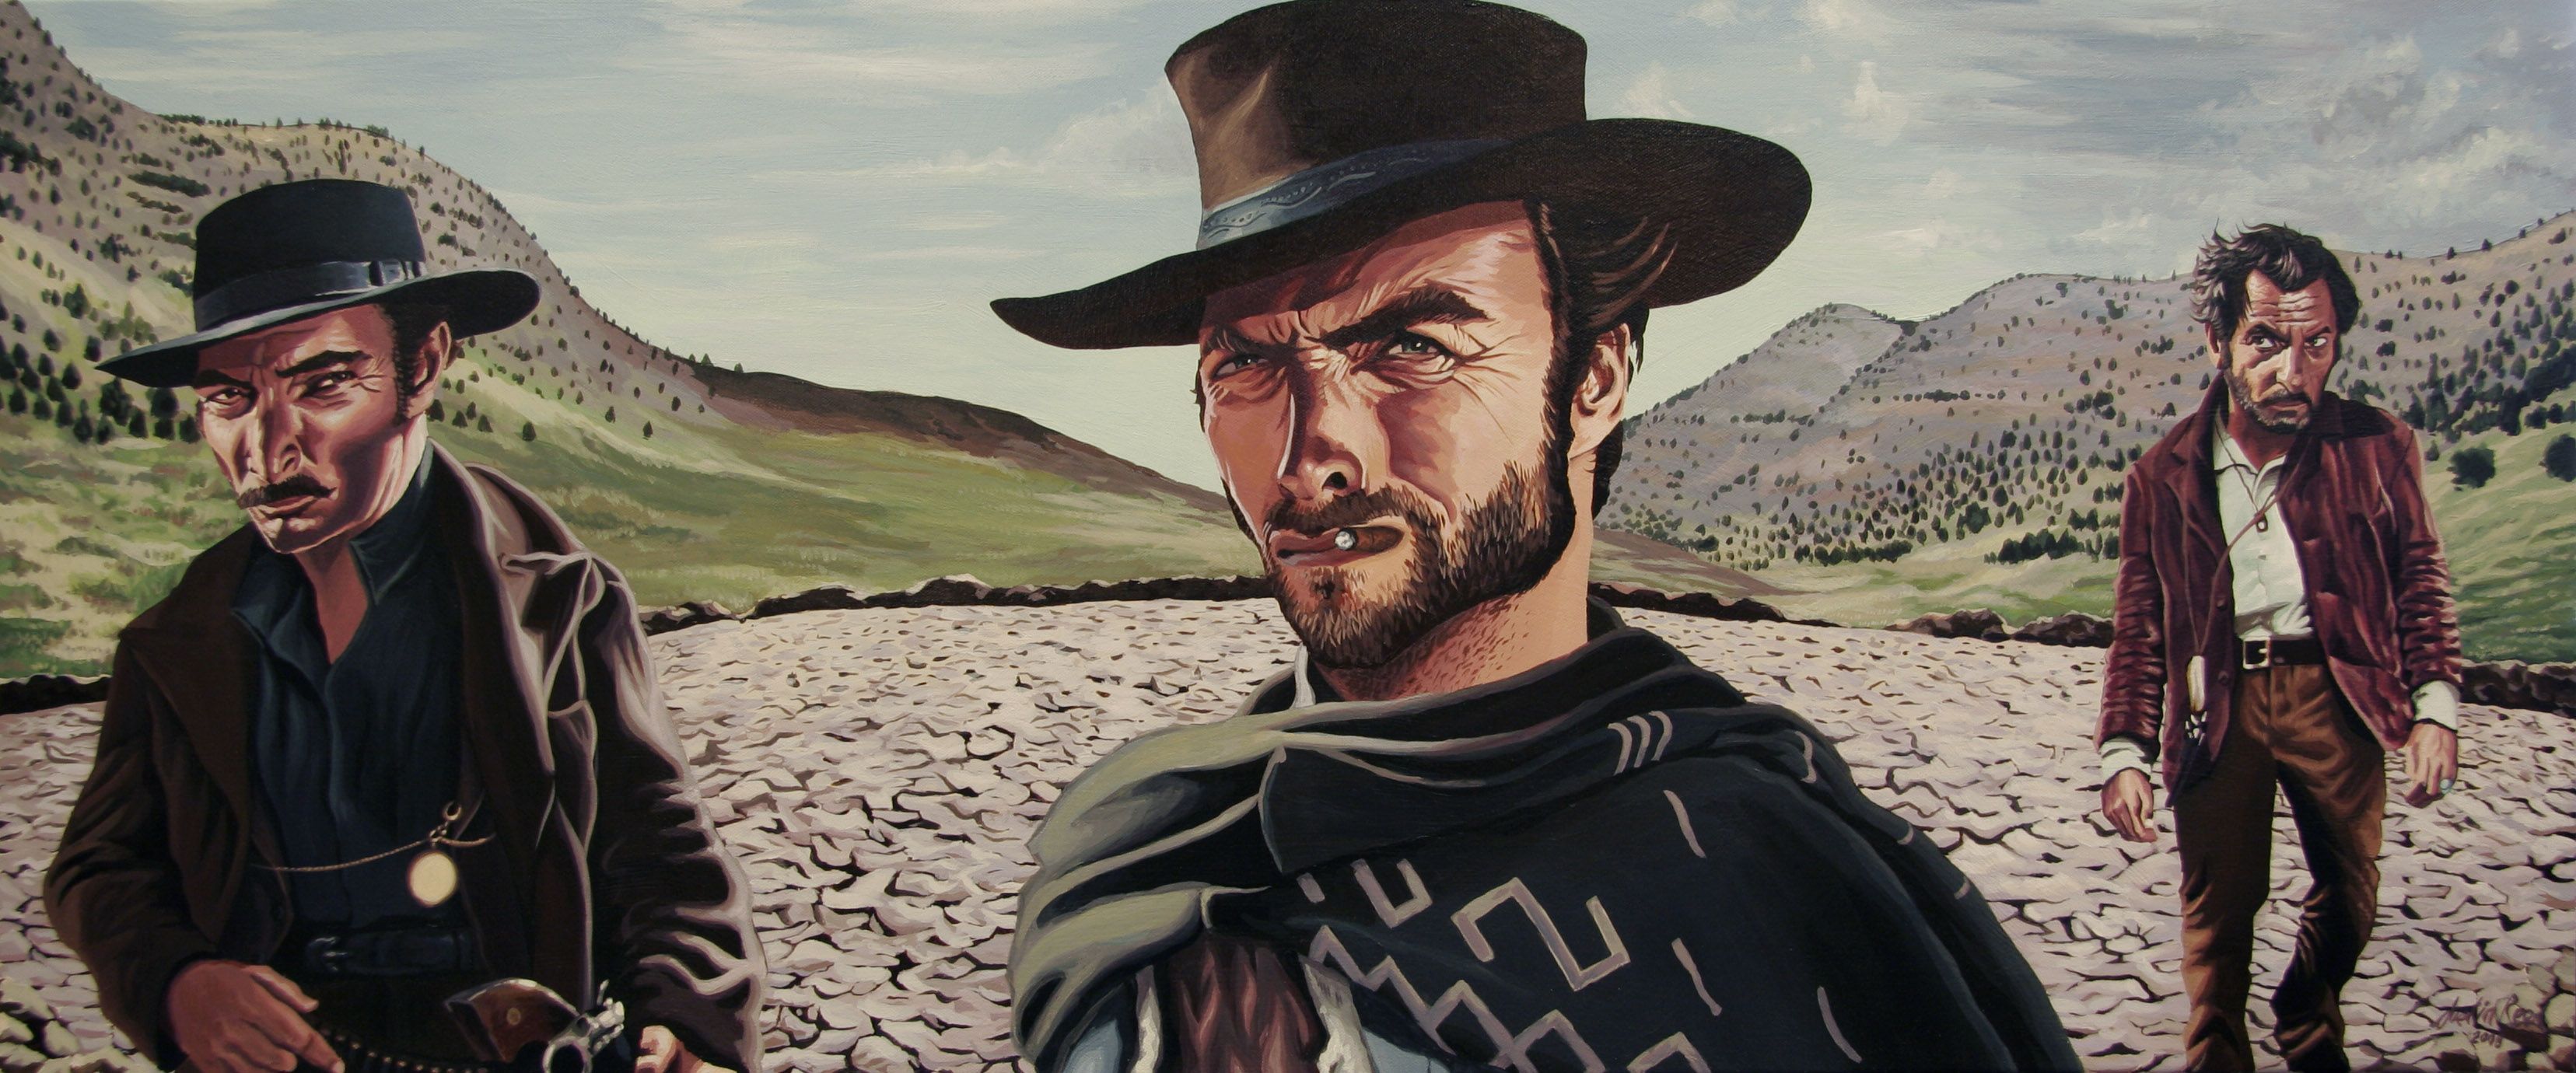 THE GOOD THE BAD AND THE UGLY western clint eastwood g wallpaper ...